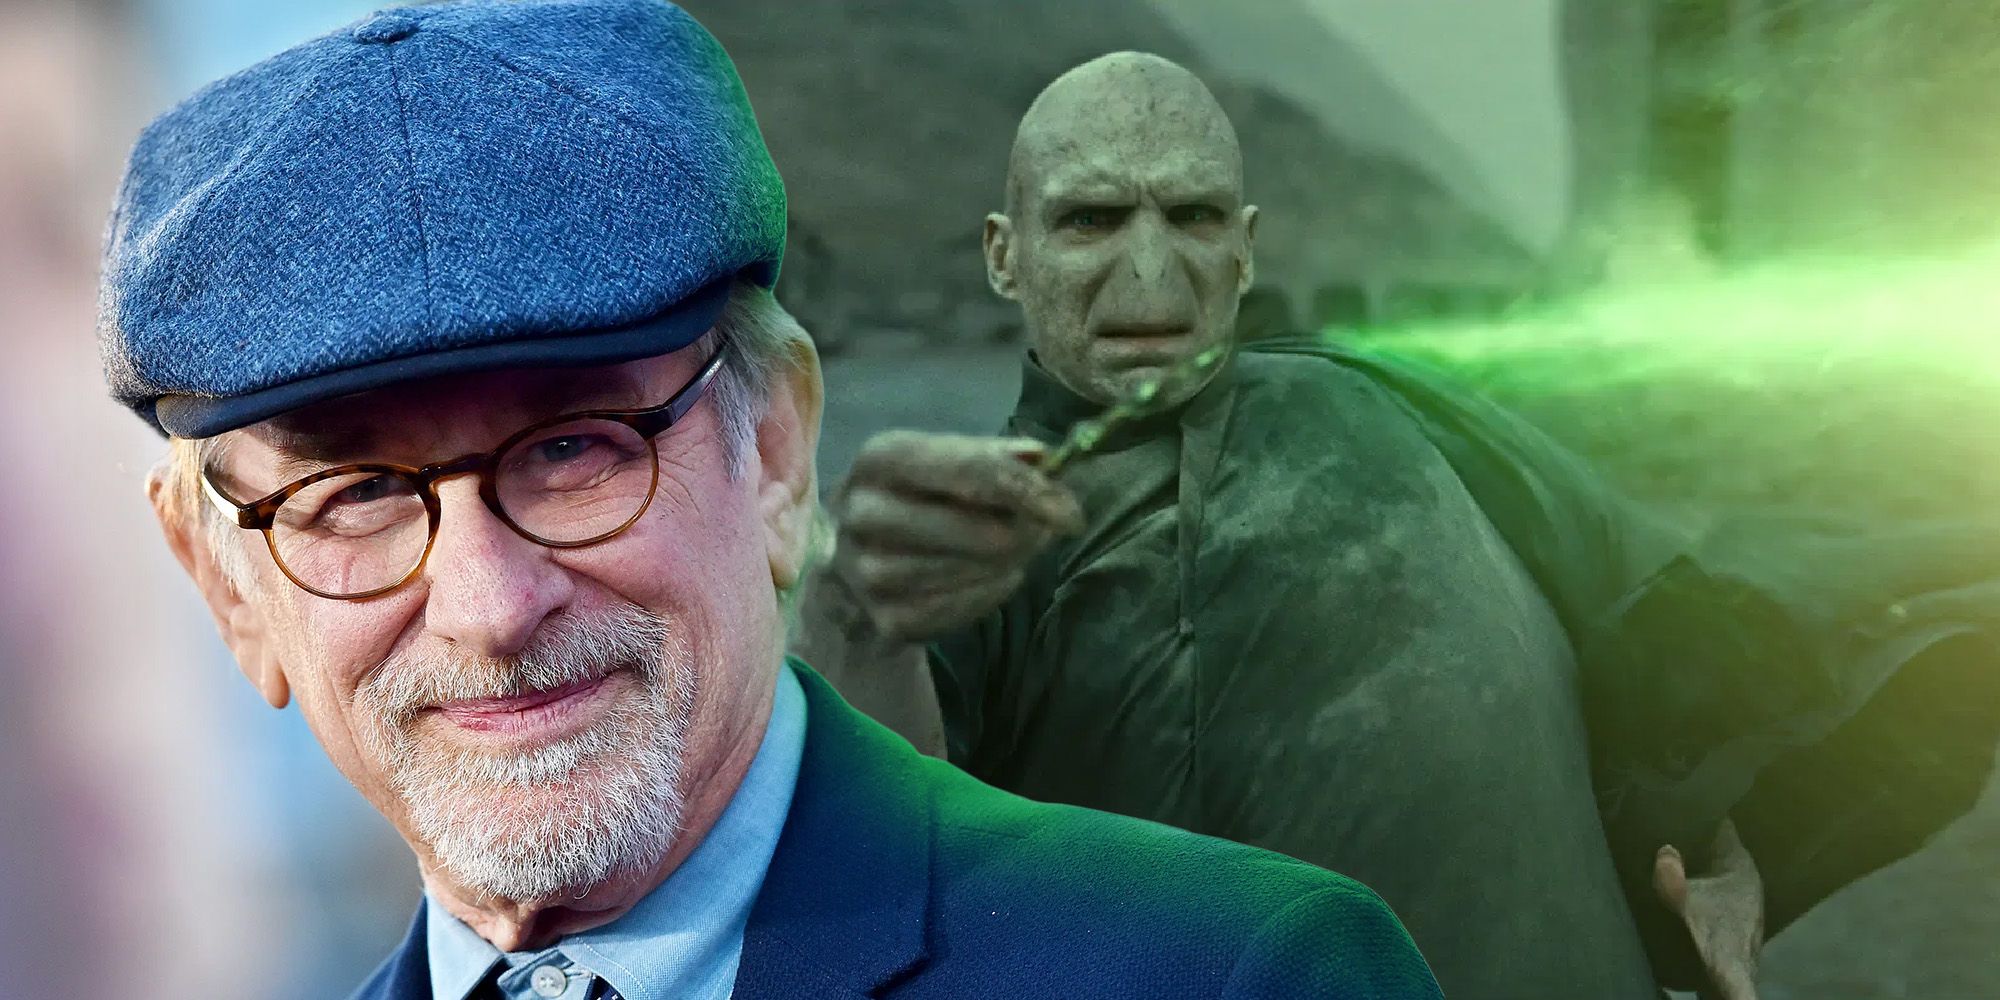 Steven Spielberg Voldemort Harry potter and the deathly hollows part 2